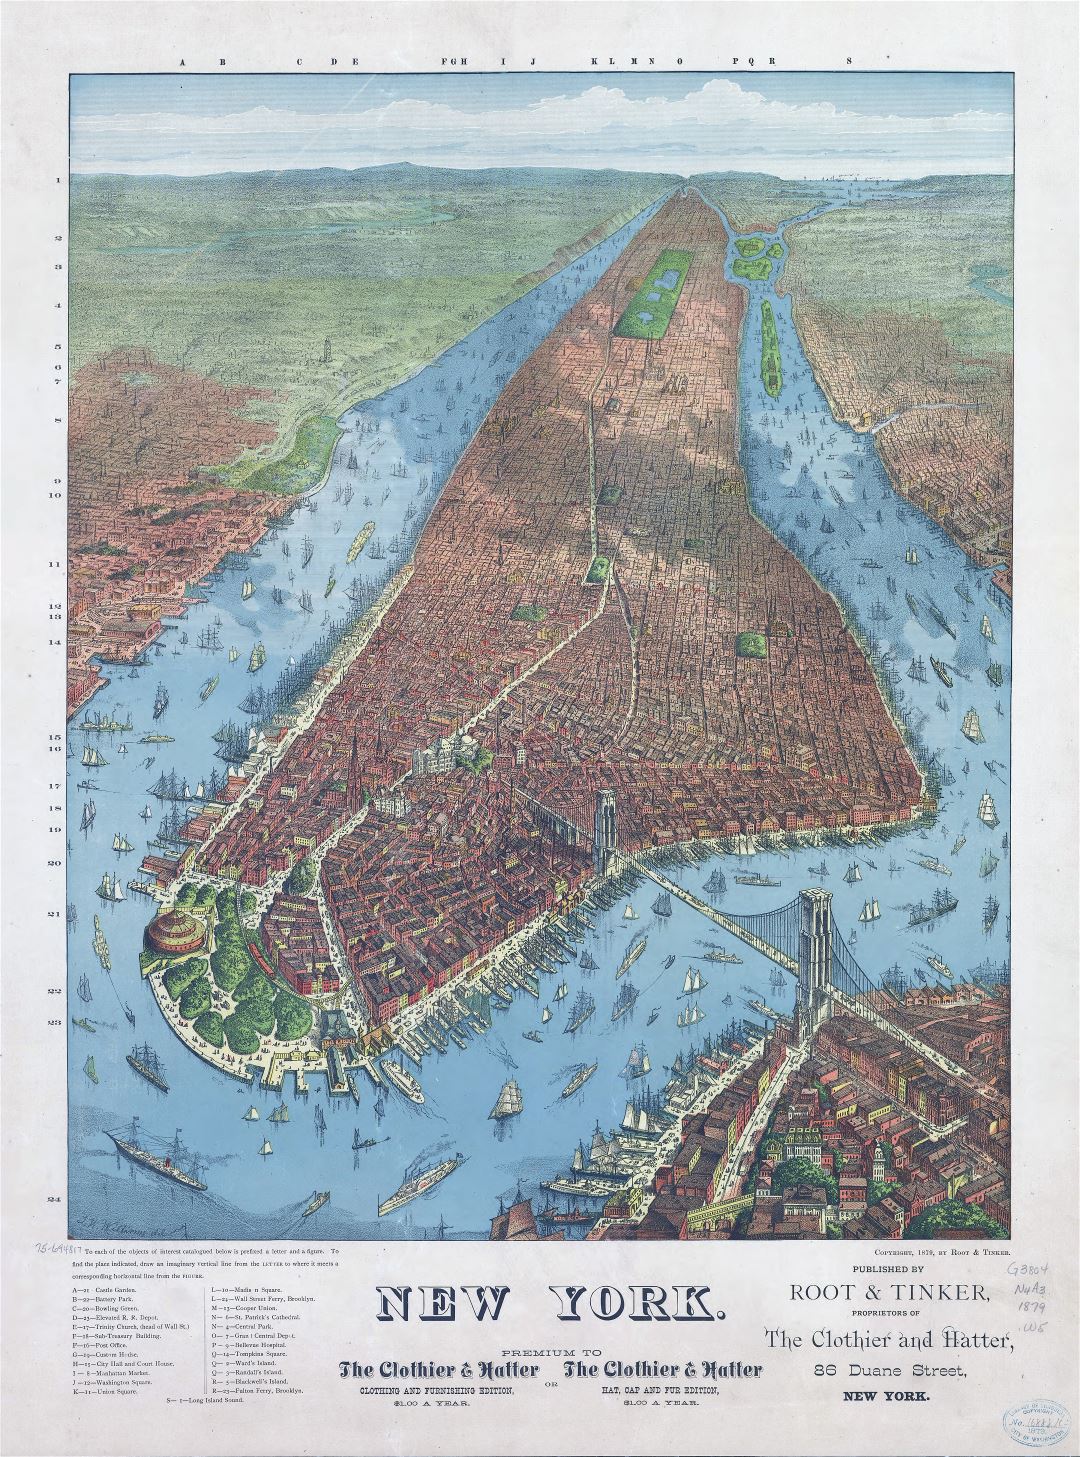 Large scale old panoramic map of New York city - 1879